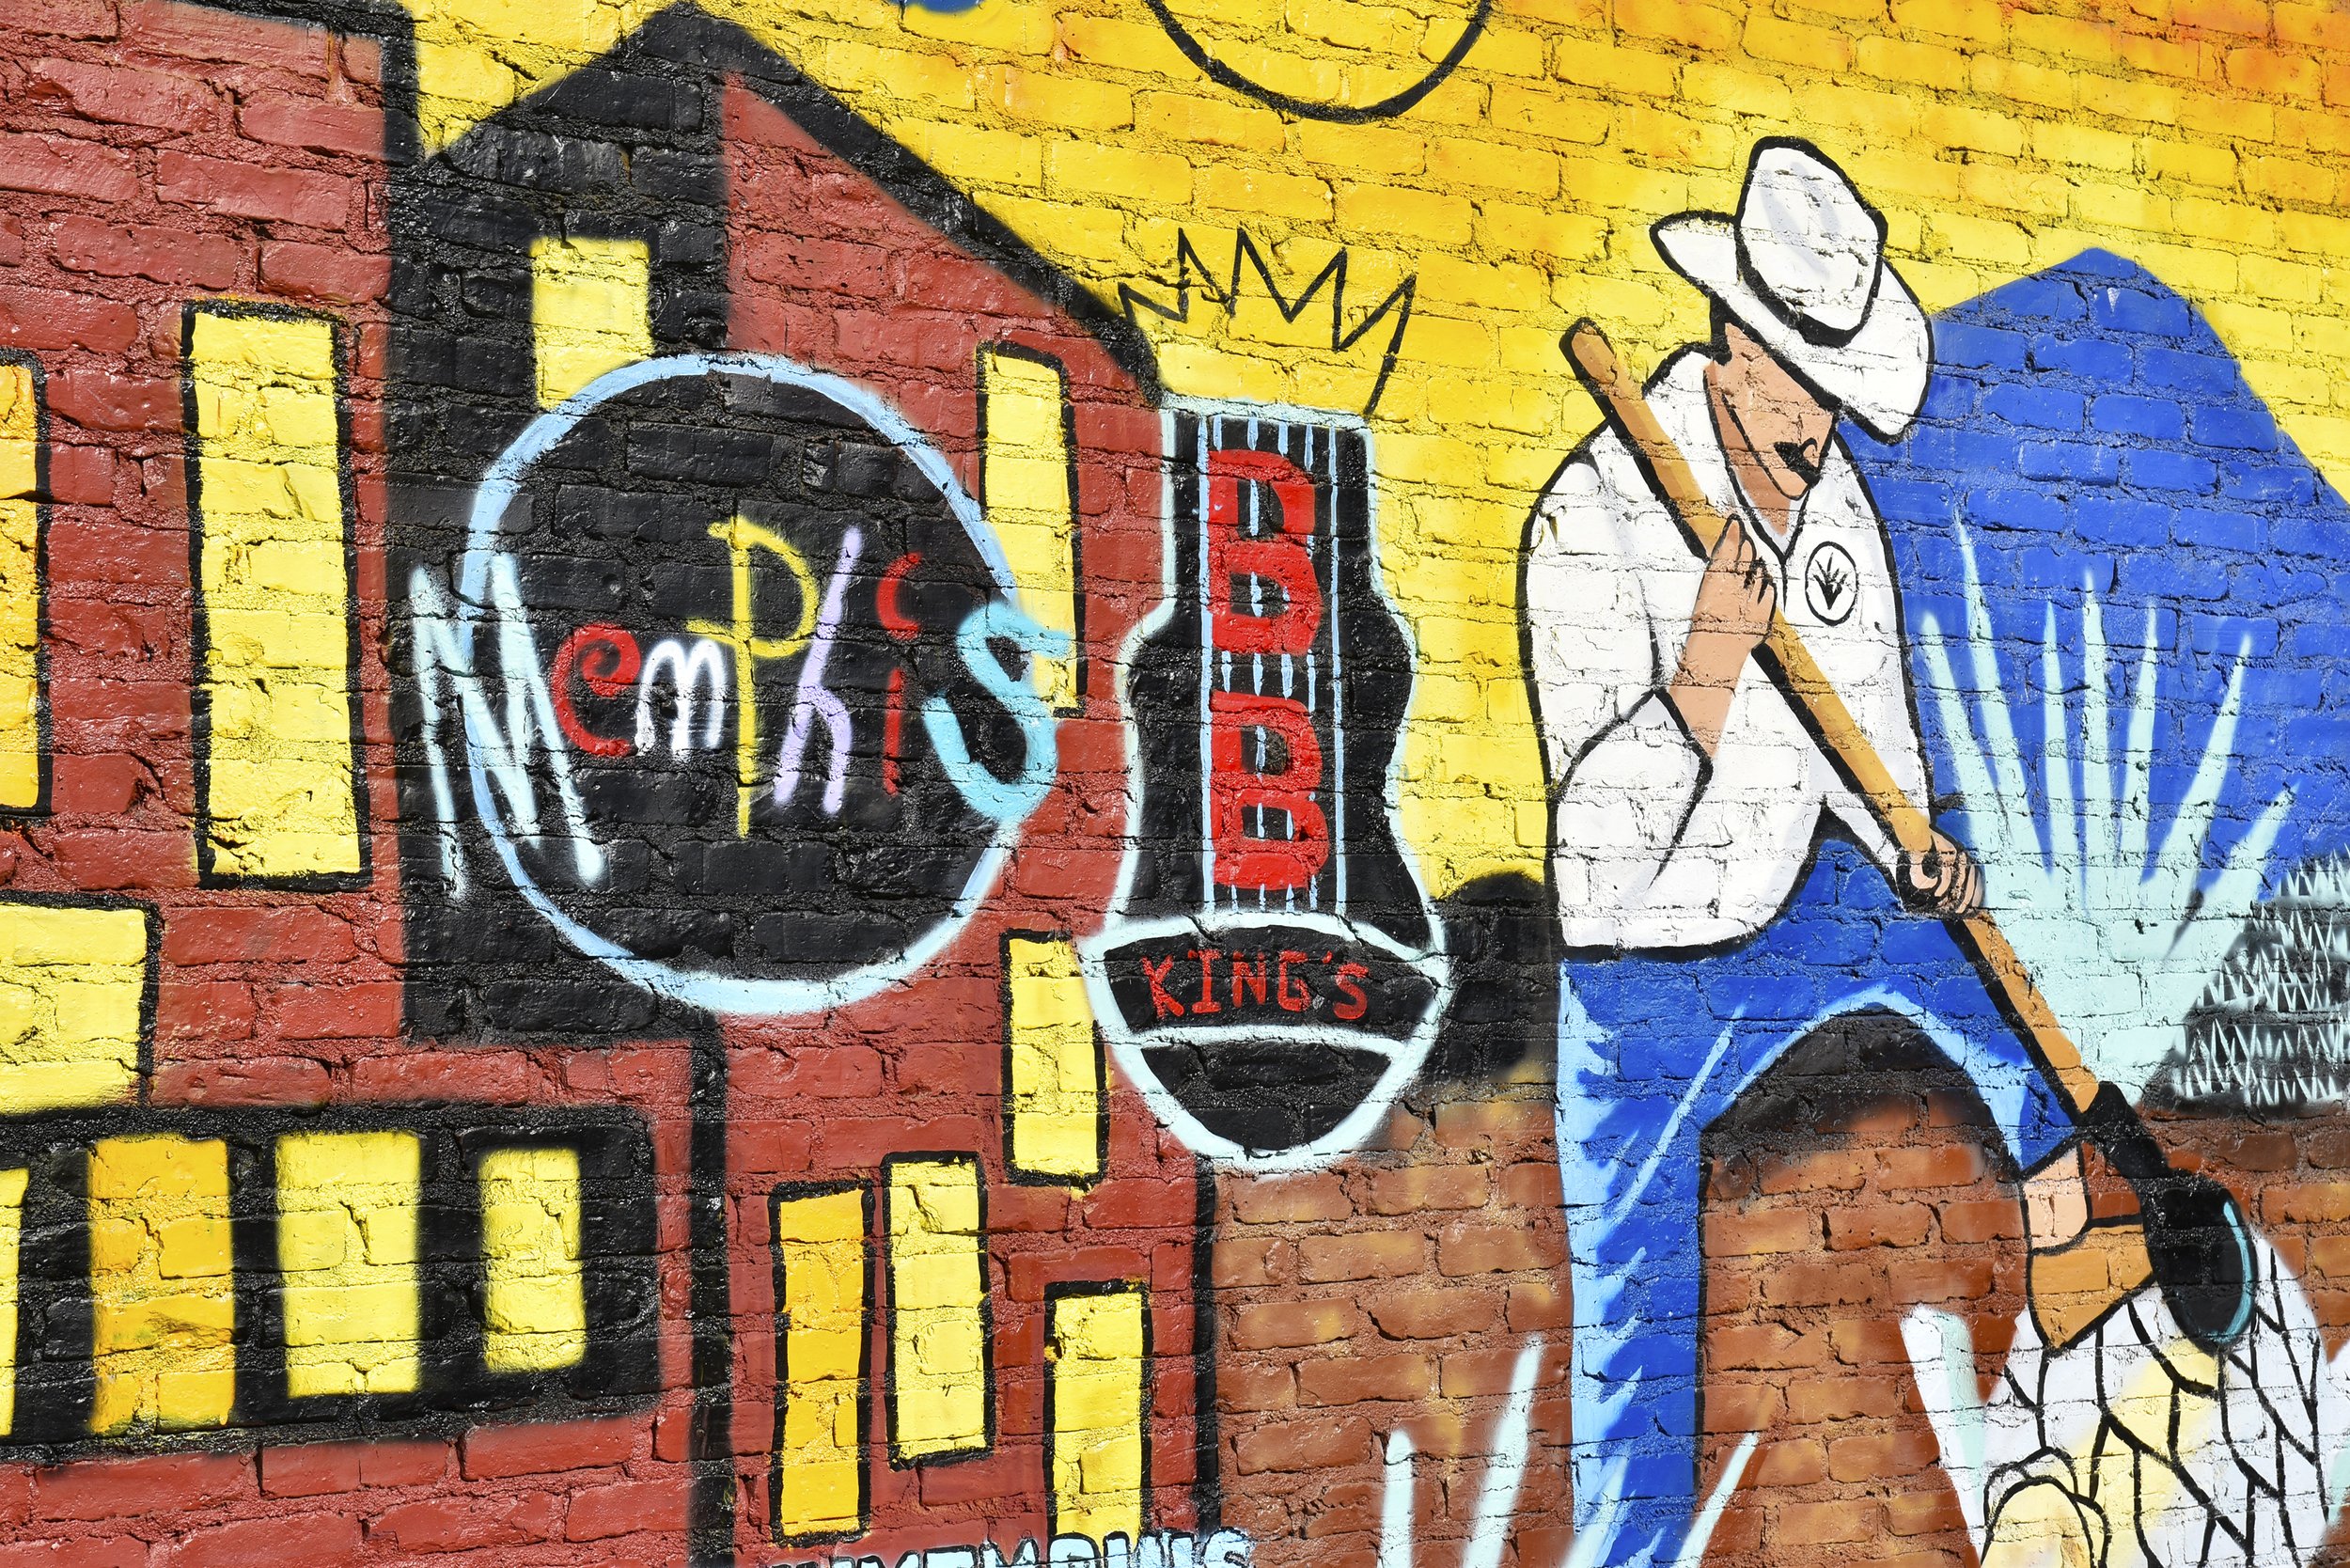  Mural as seen at Agavos Cocina Memphis featuring artistic interpretation of Beale Street’s Memphis Music and BB King’s signs  Mural art by @carlosgma13 (?) 